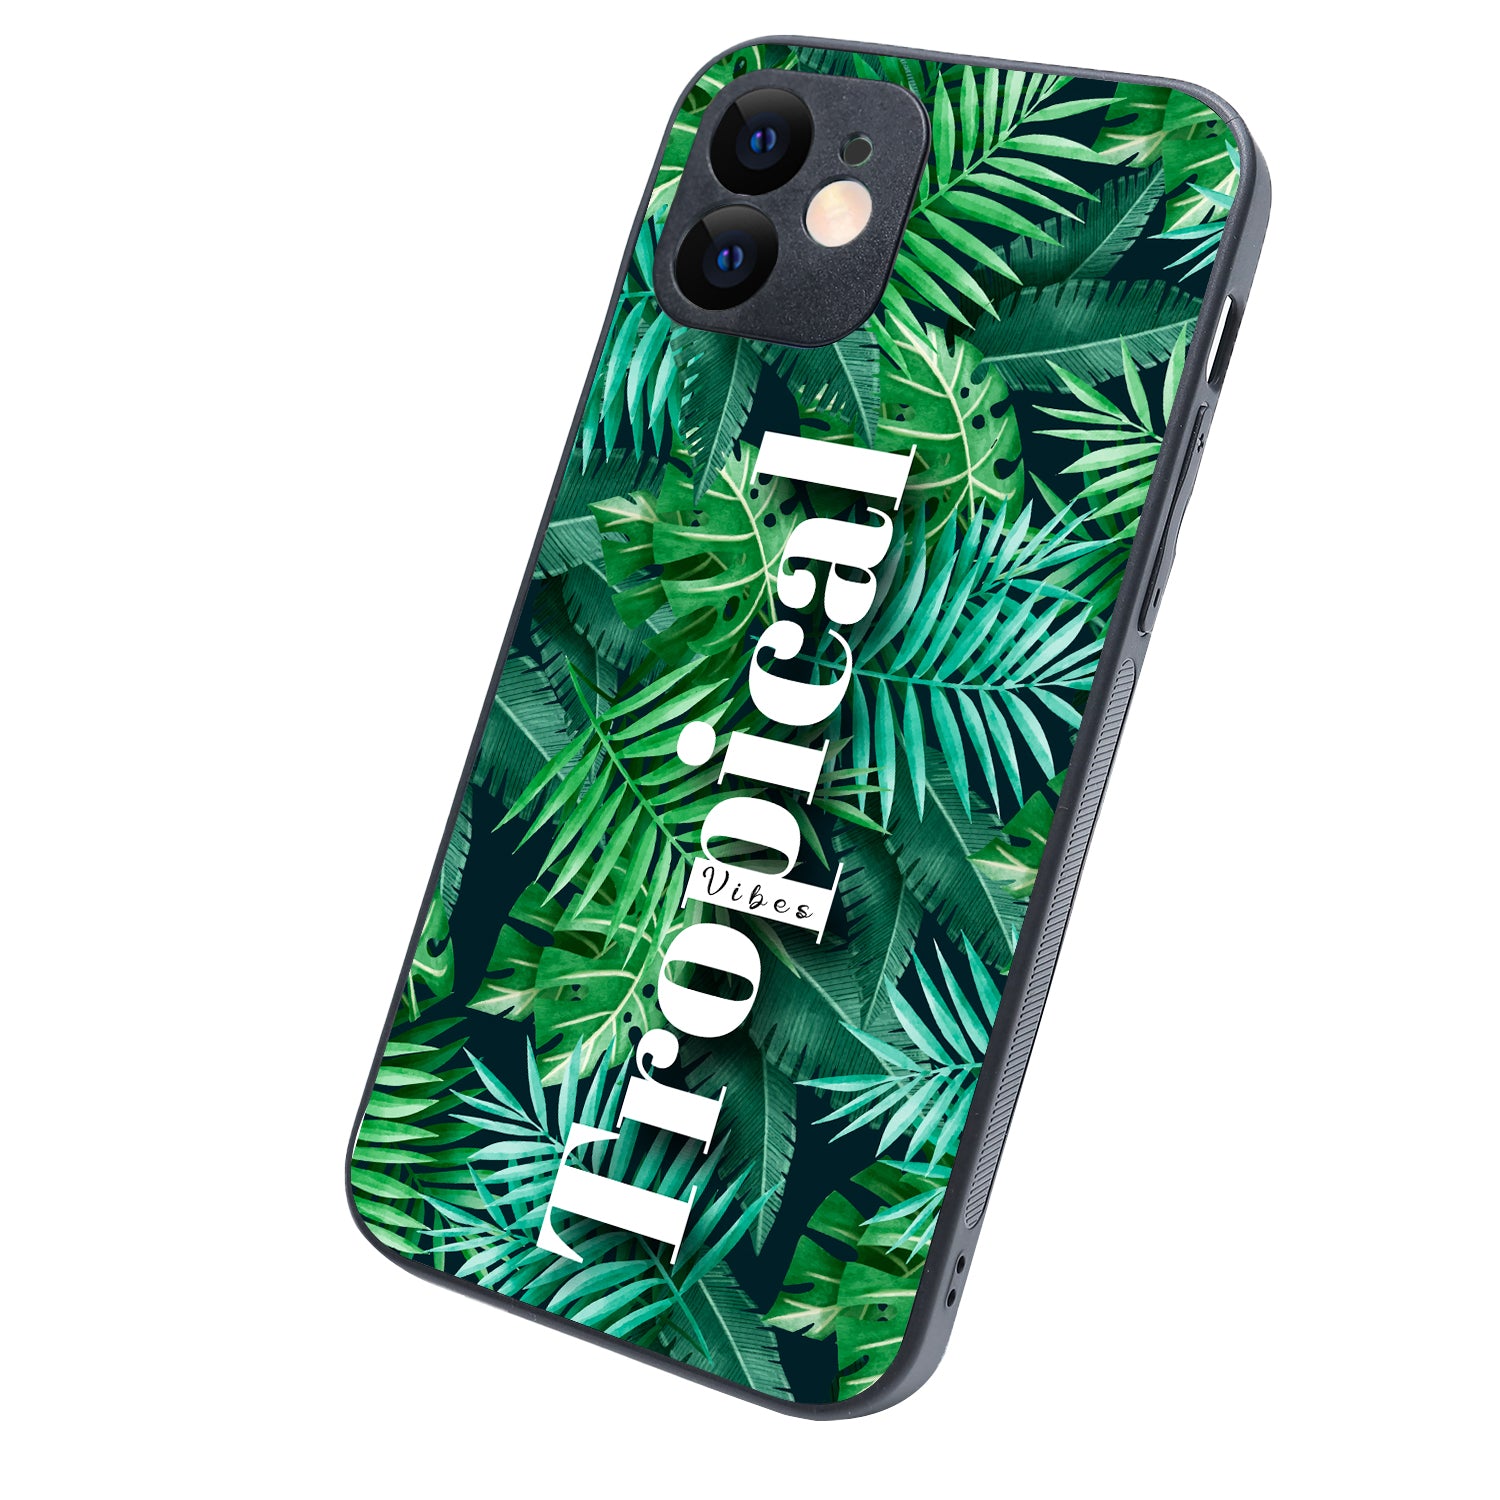 Tropical Vibes Fauna iPhone 12 Case